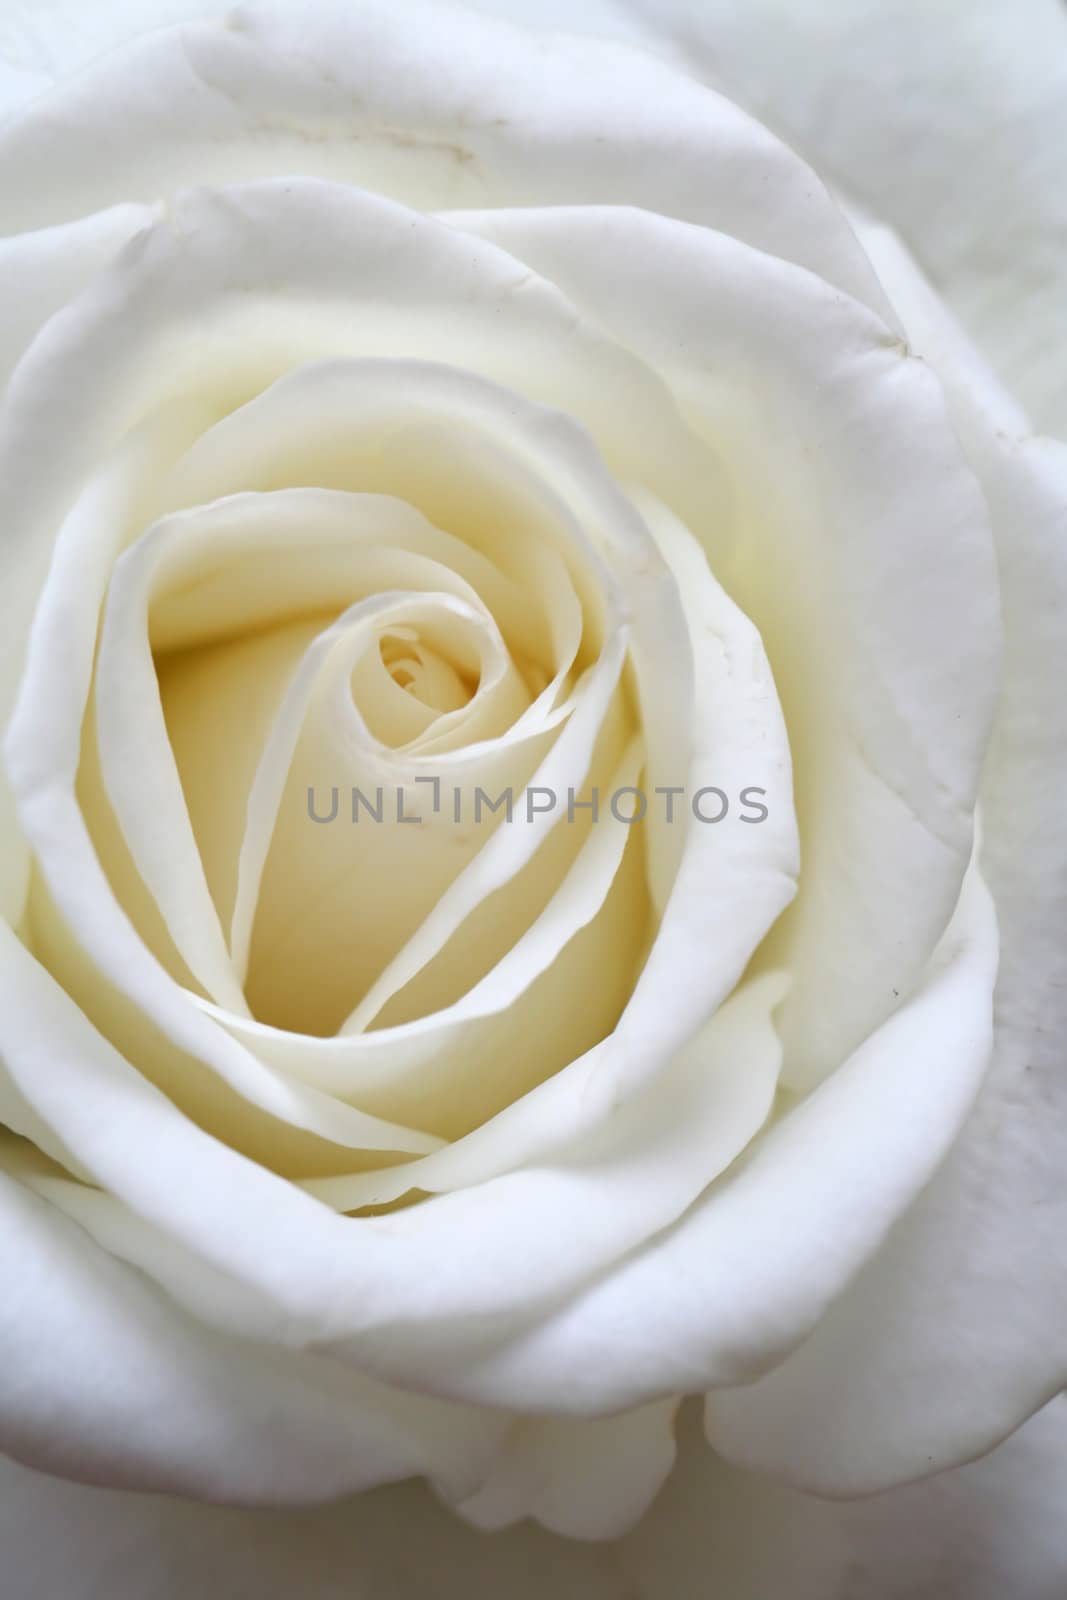 the white rose - the symbol of cleanness and purity